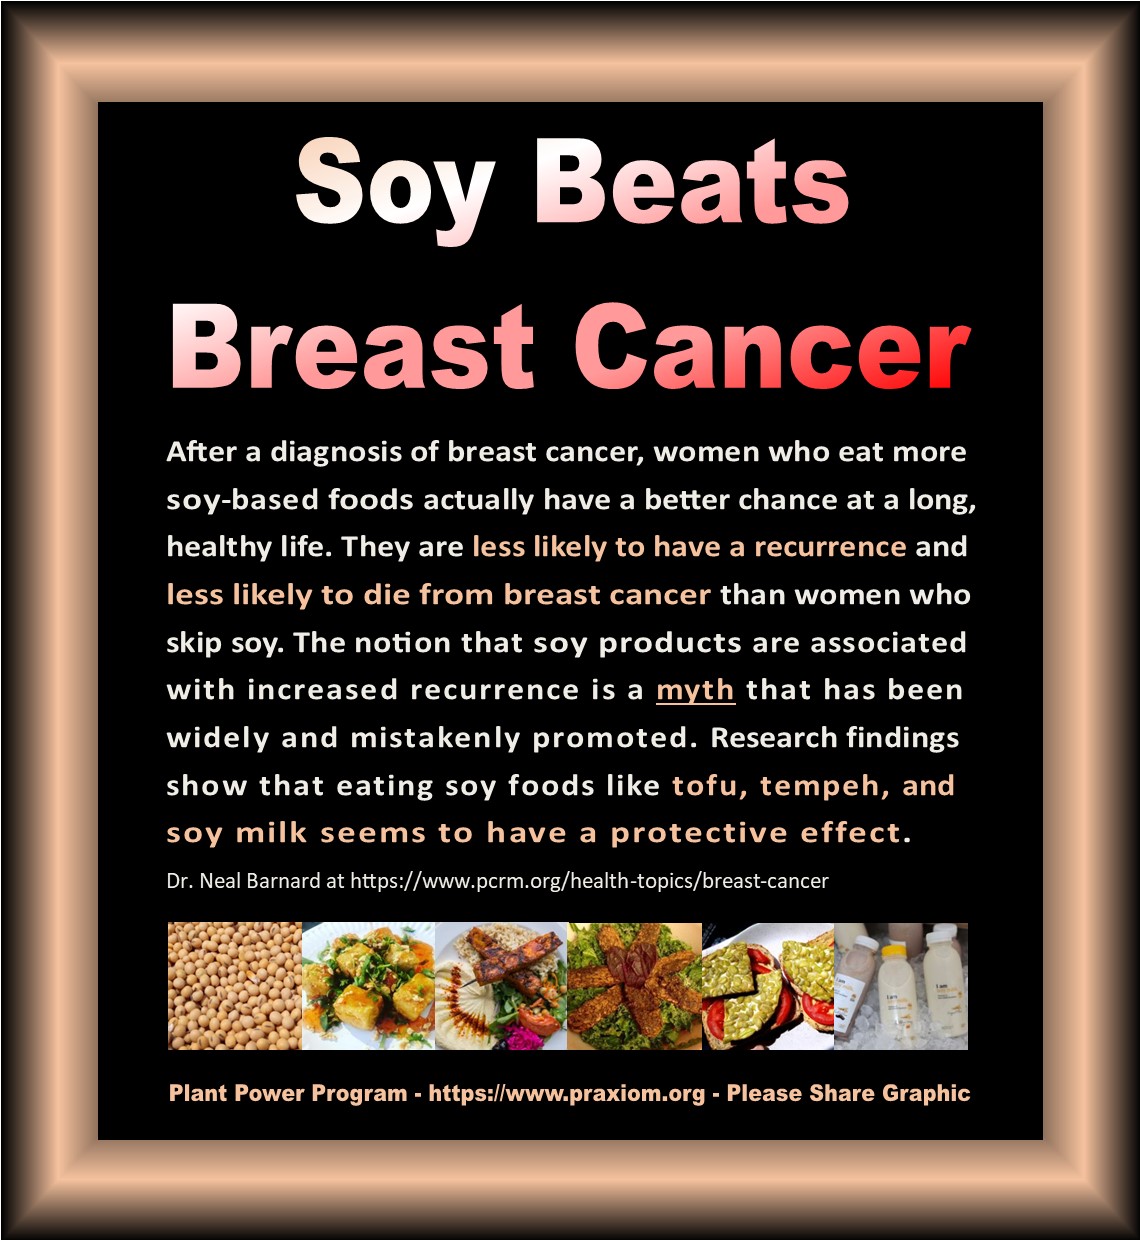 Soy Beats Breast Cancer